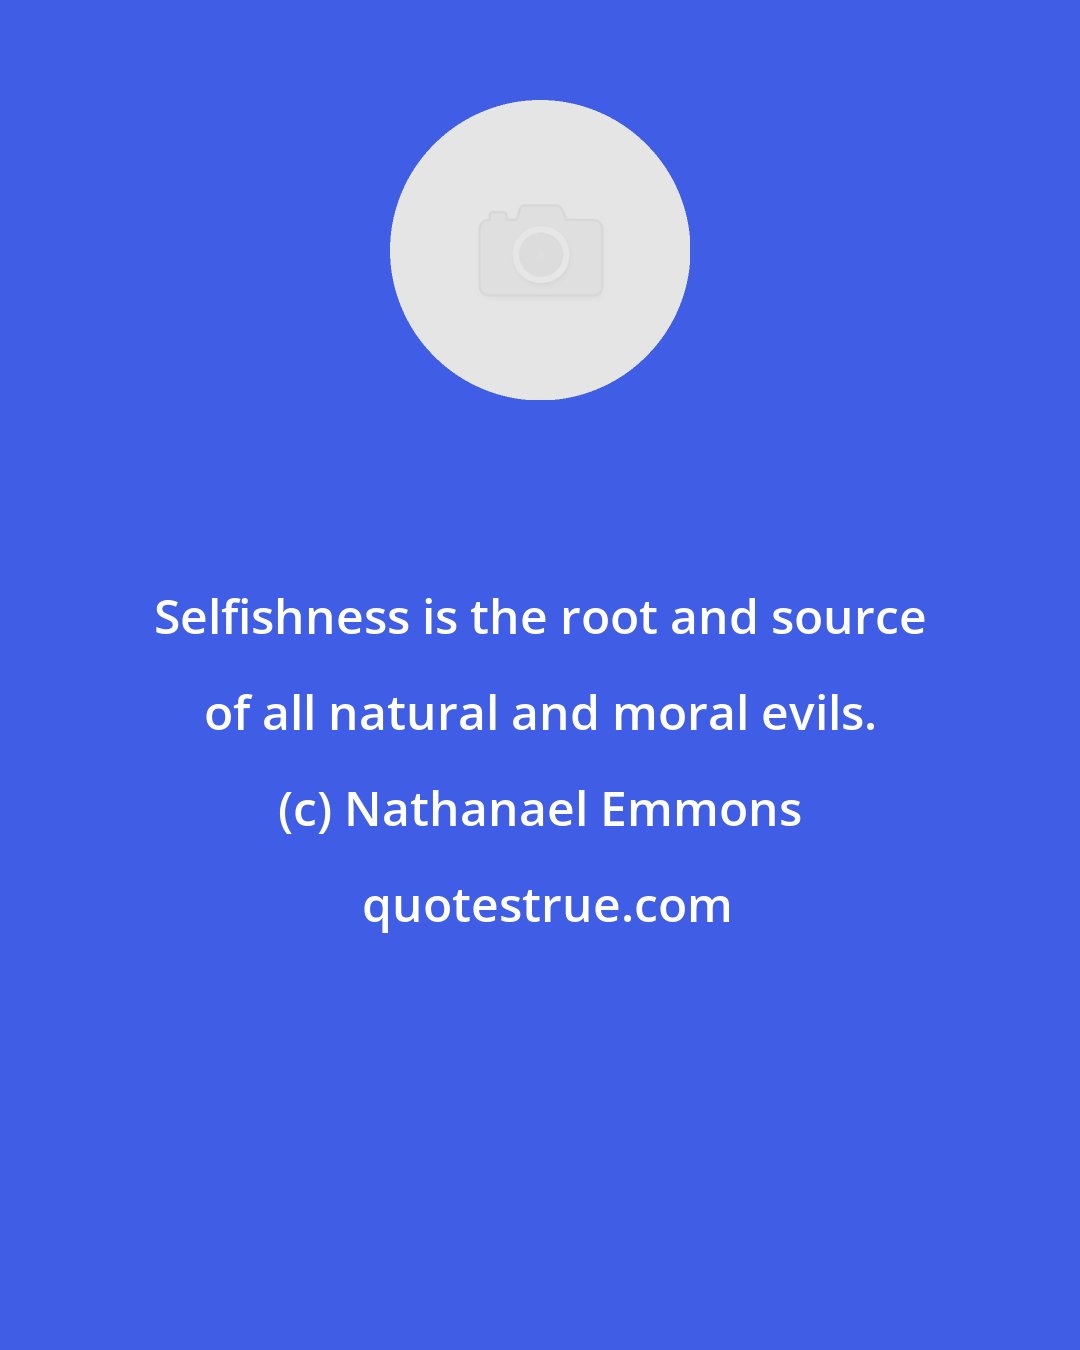 Nathanael Emmons: Selfishness is the root and source of all natural and moral evils.